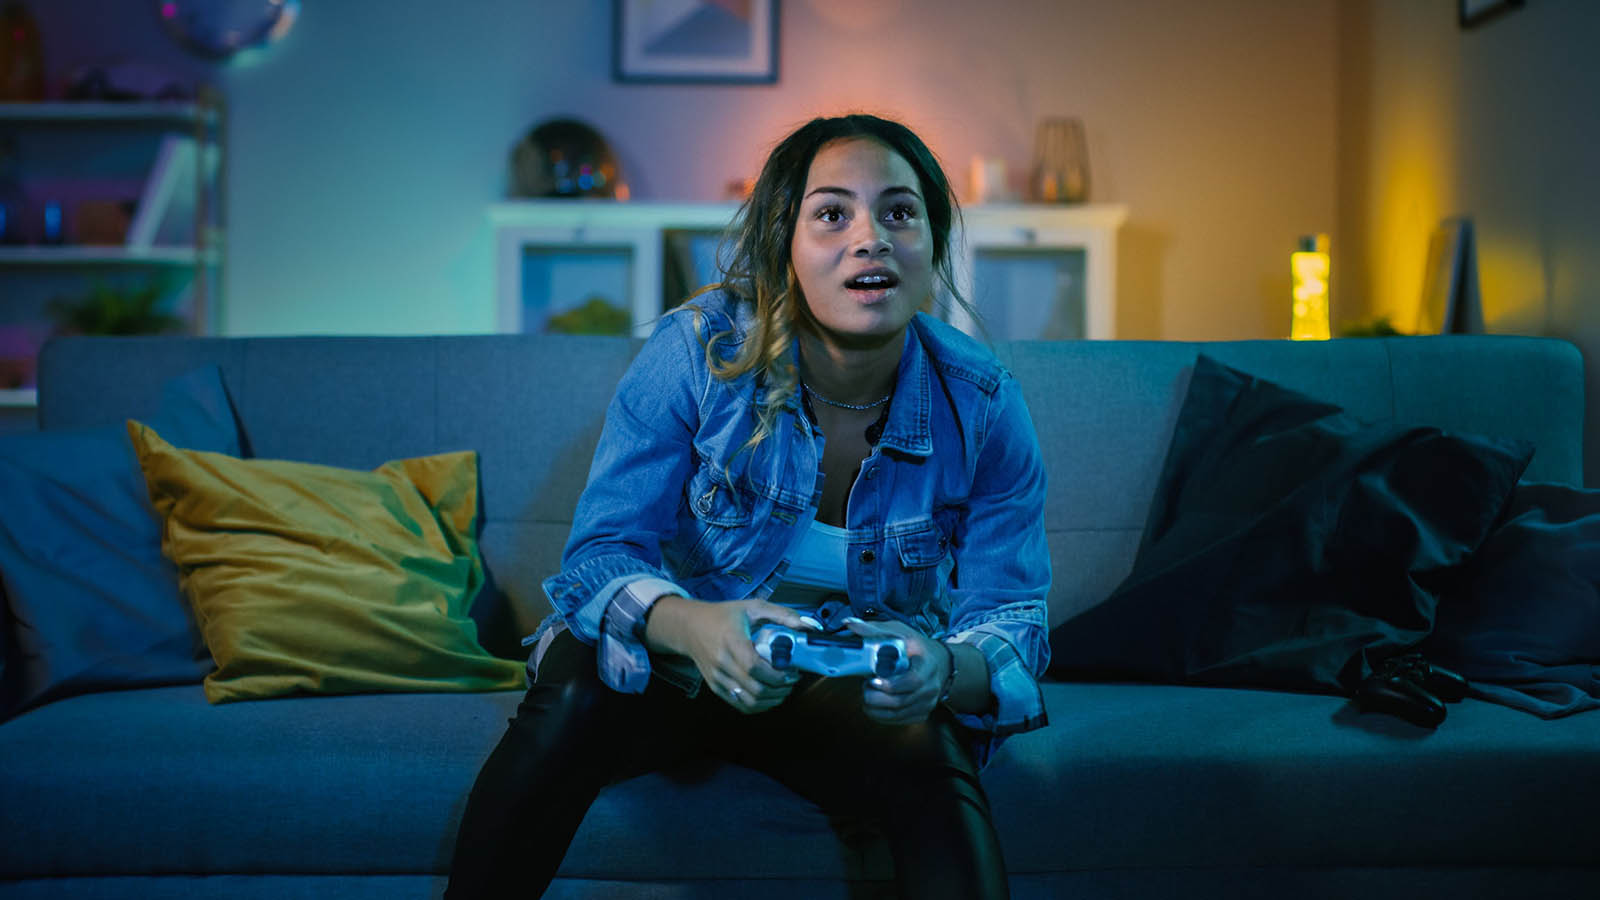 Woman On A Couch Playing A Video Game